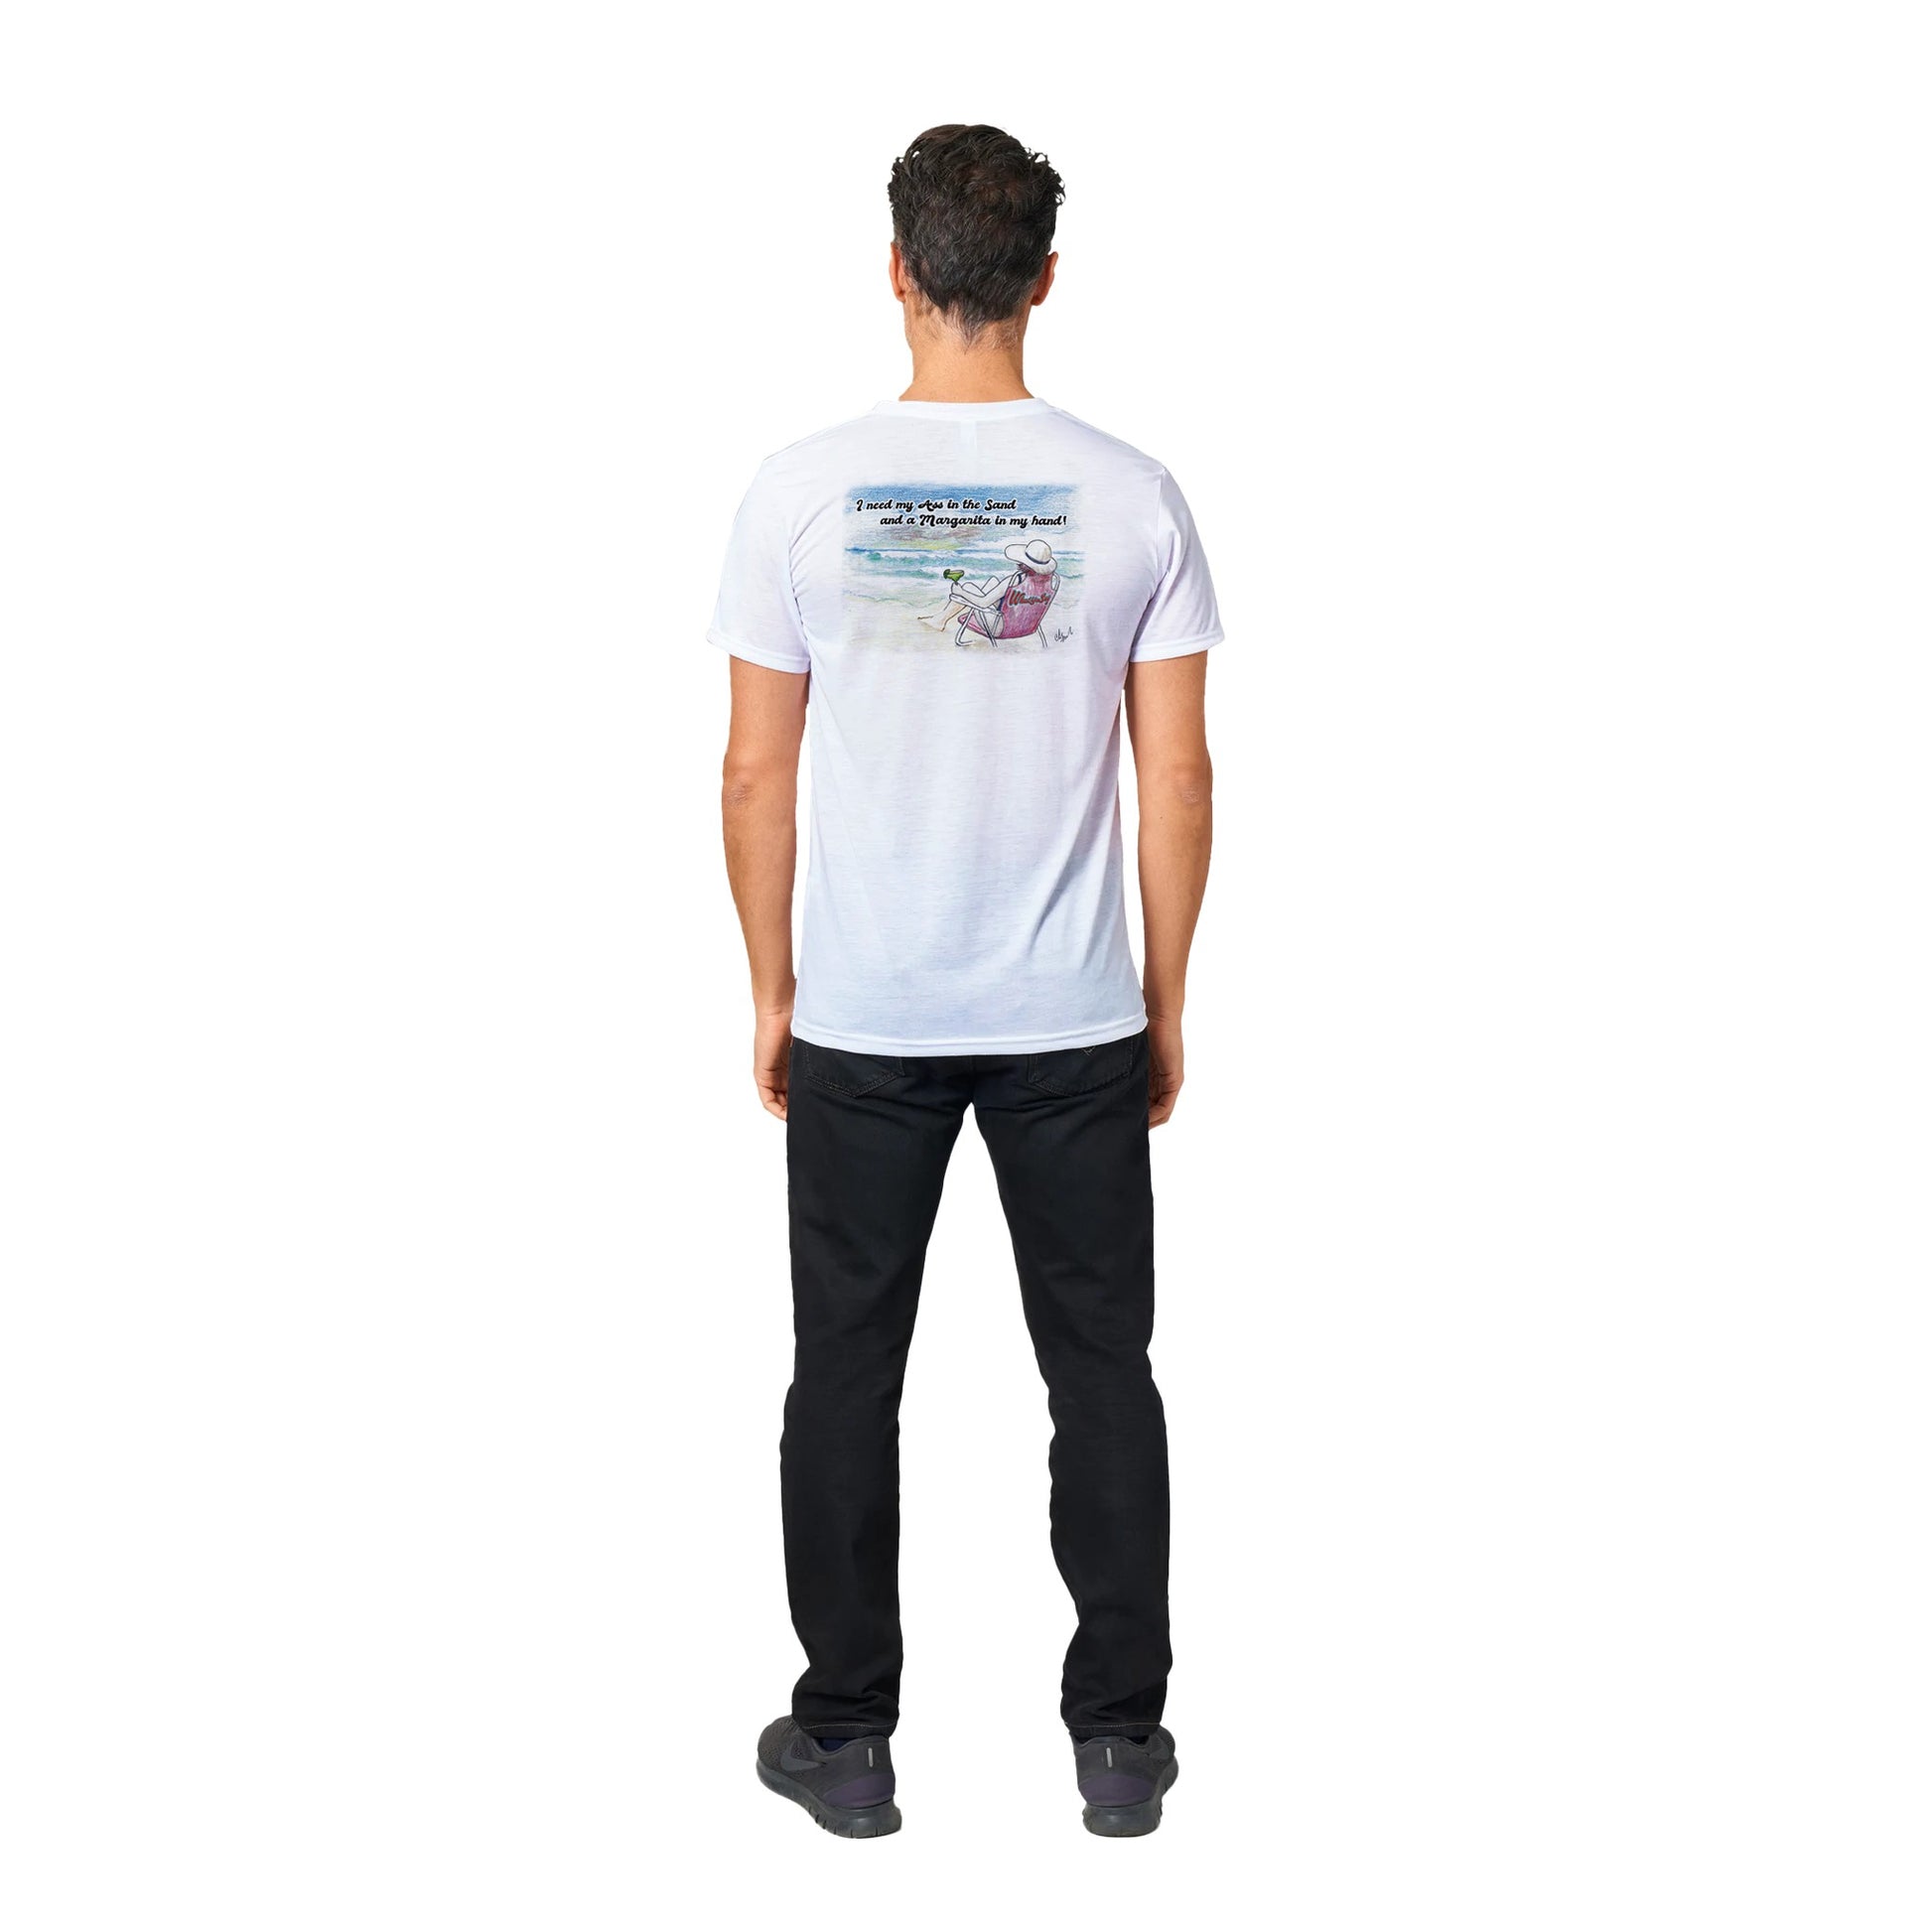 A white Performance Moisture-wicking with PosiCharge Unisex Crewneck t-shirt with original artwork and motto I need my Ass in the Sand and a Margarita in my hand on back of t-shirt and WhatYa Say logo on front from WhatYa Say Apparel a rear view of short dark haired male model.